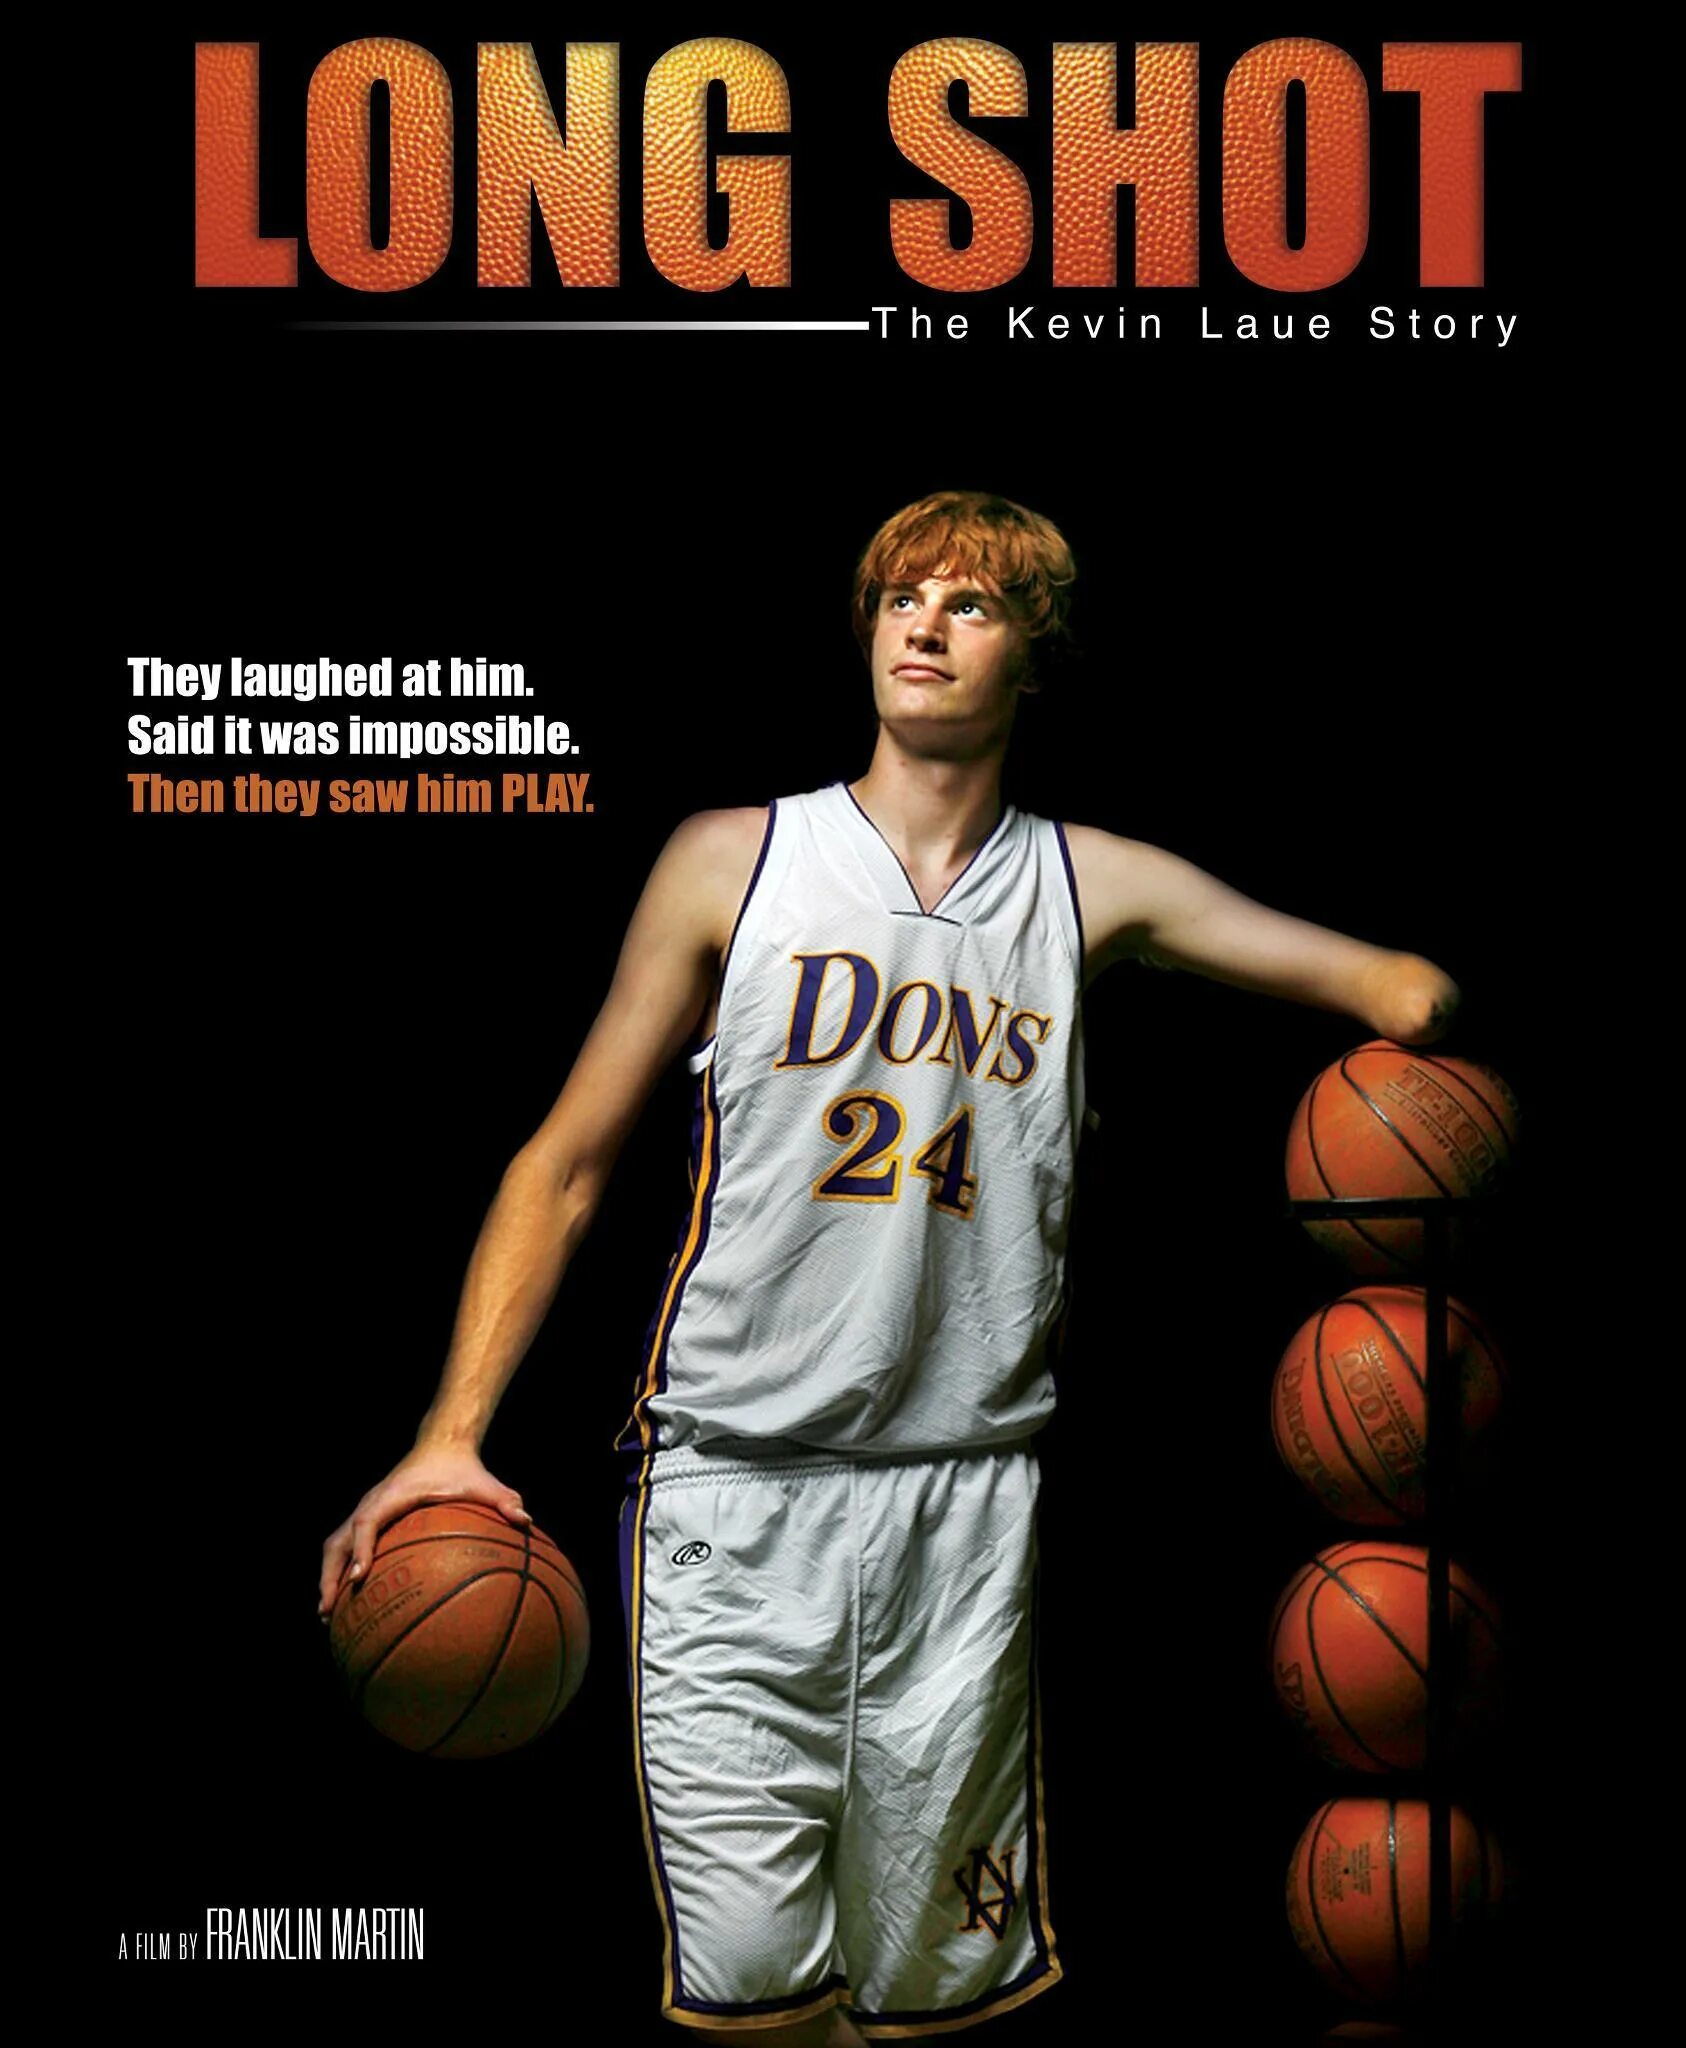 They laughed him. Long shot. Long shot poster. Kevin Case.